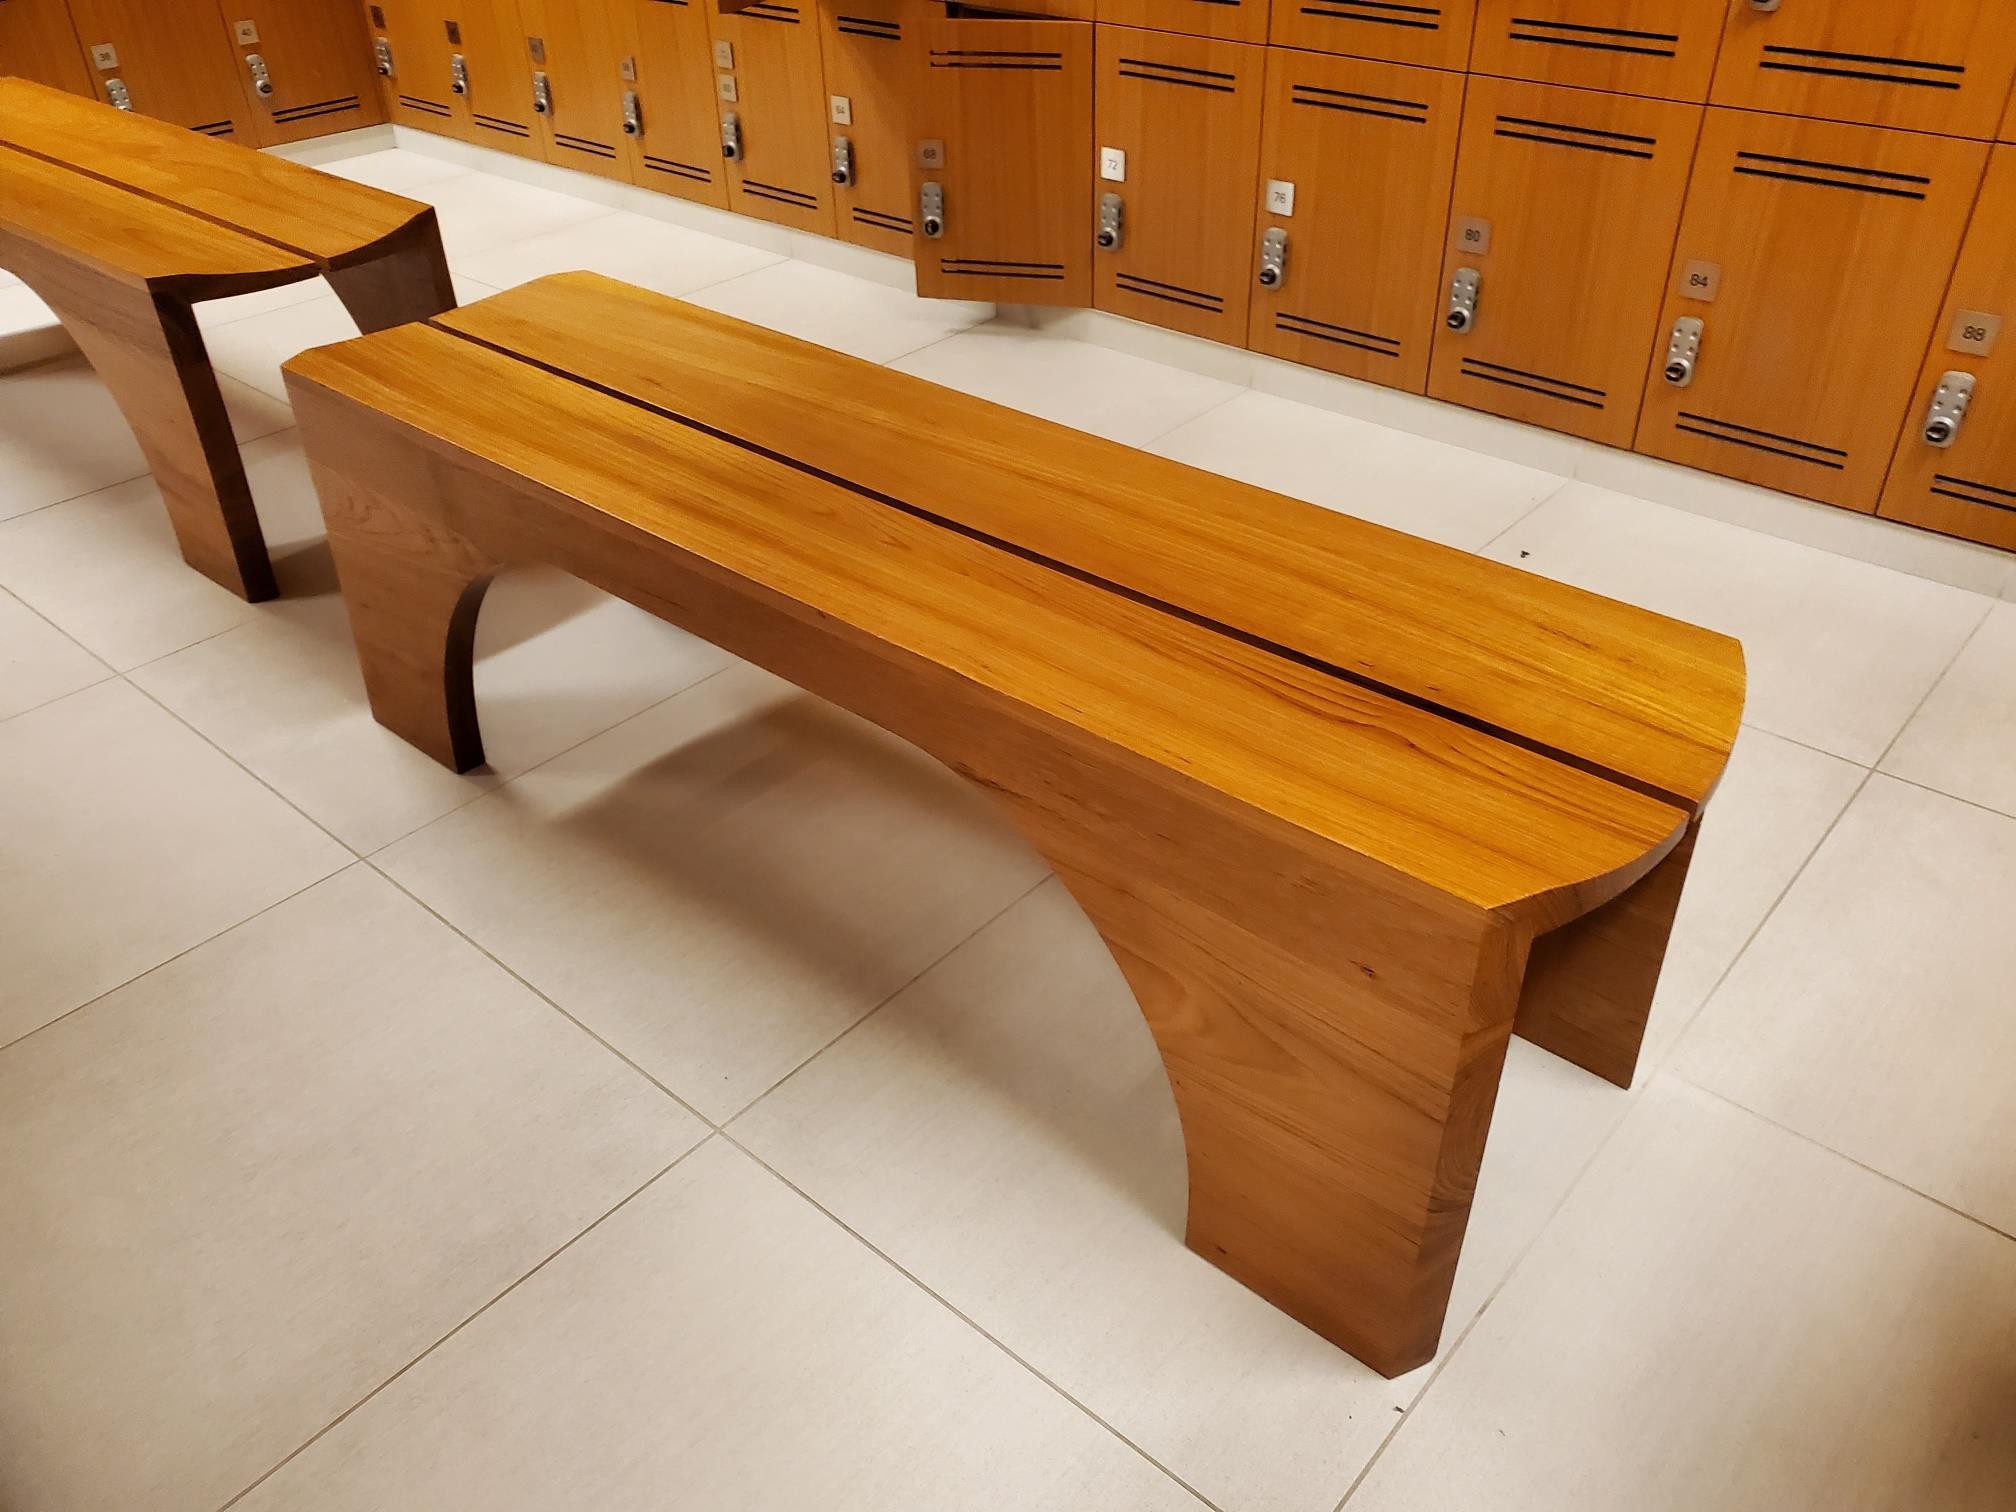 R6284 - Wooden Benches